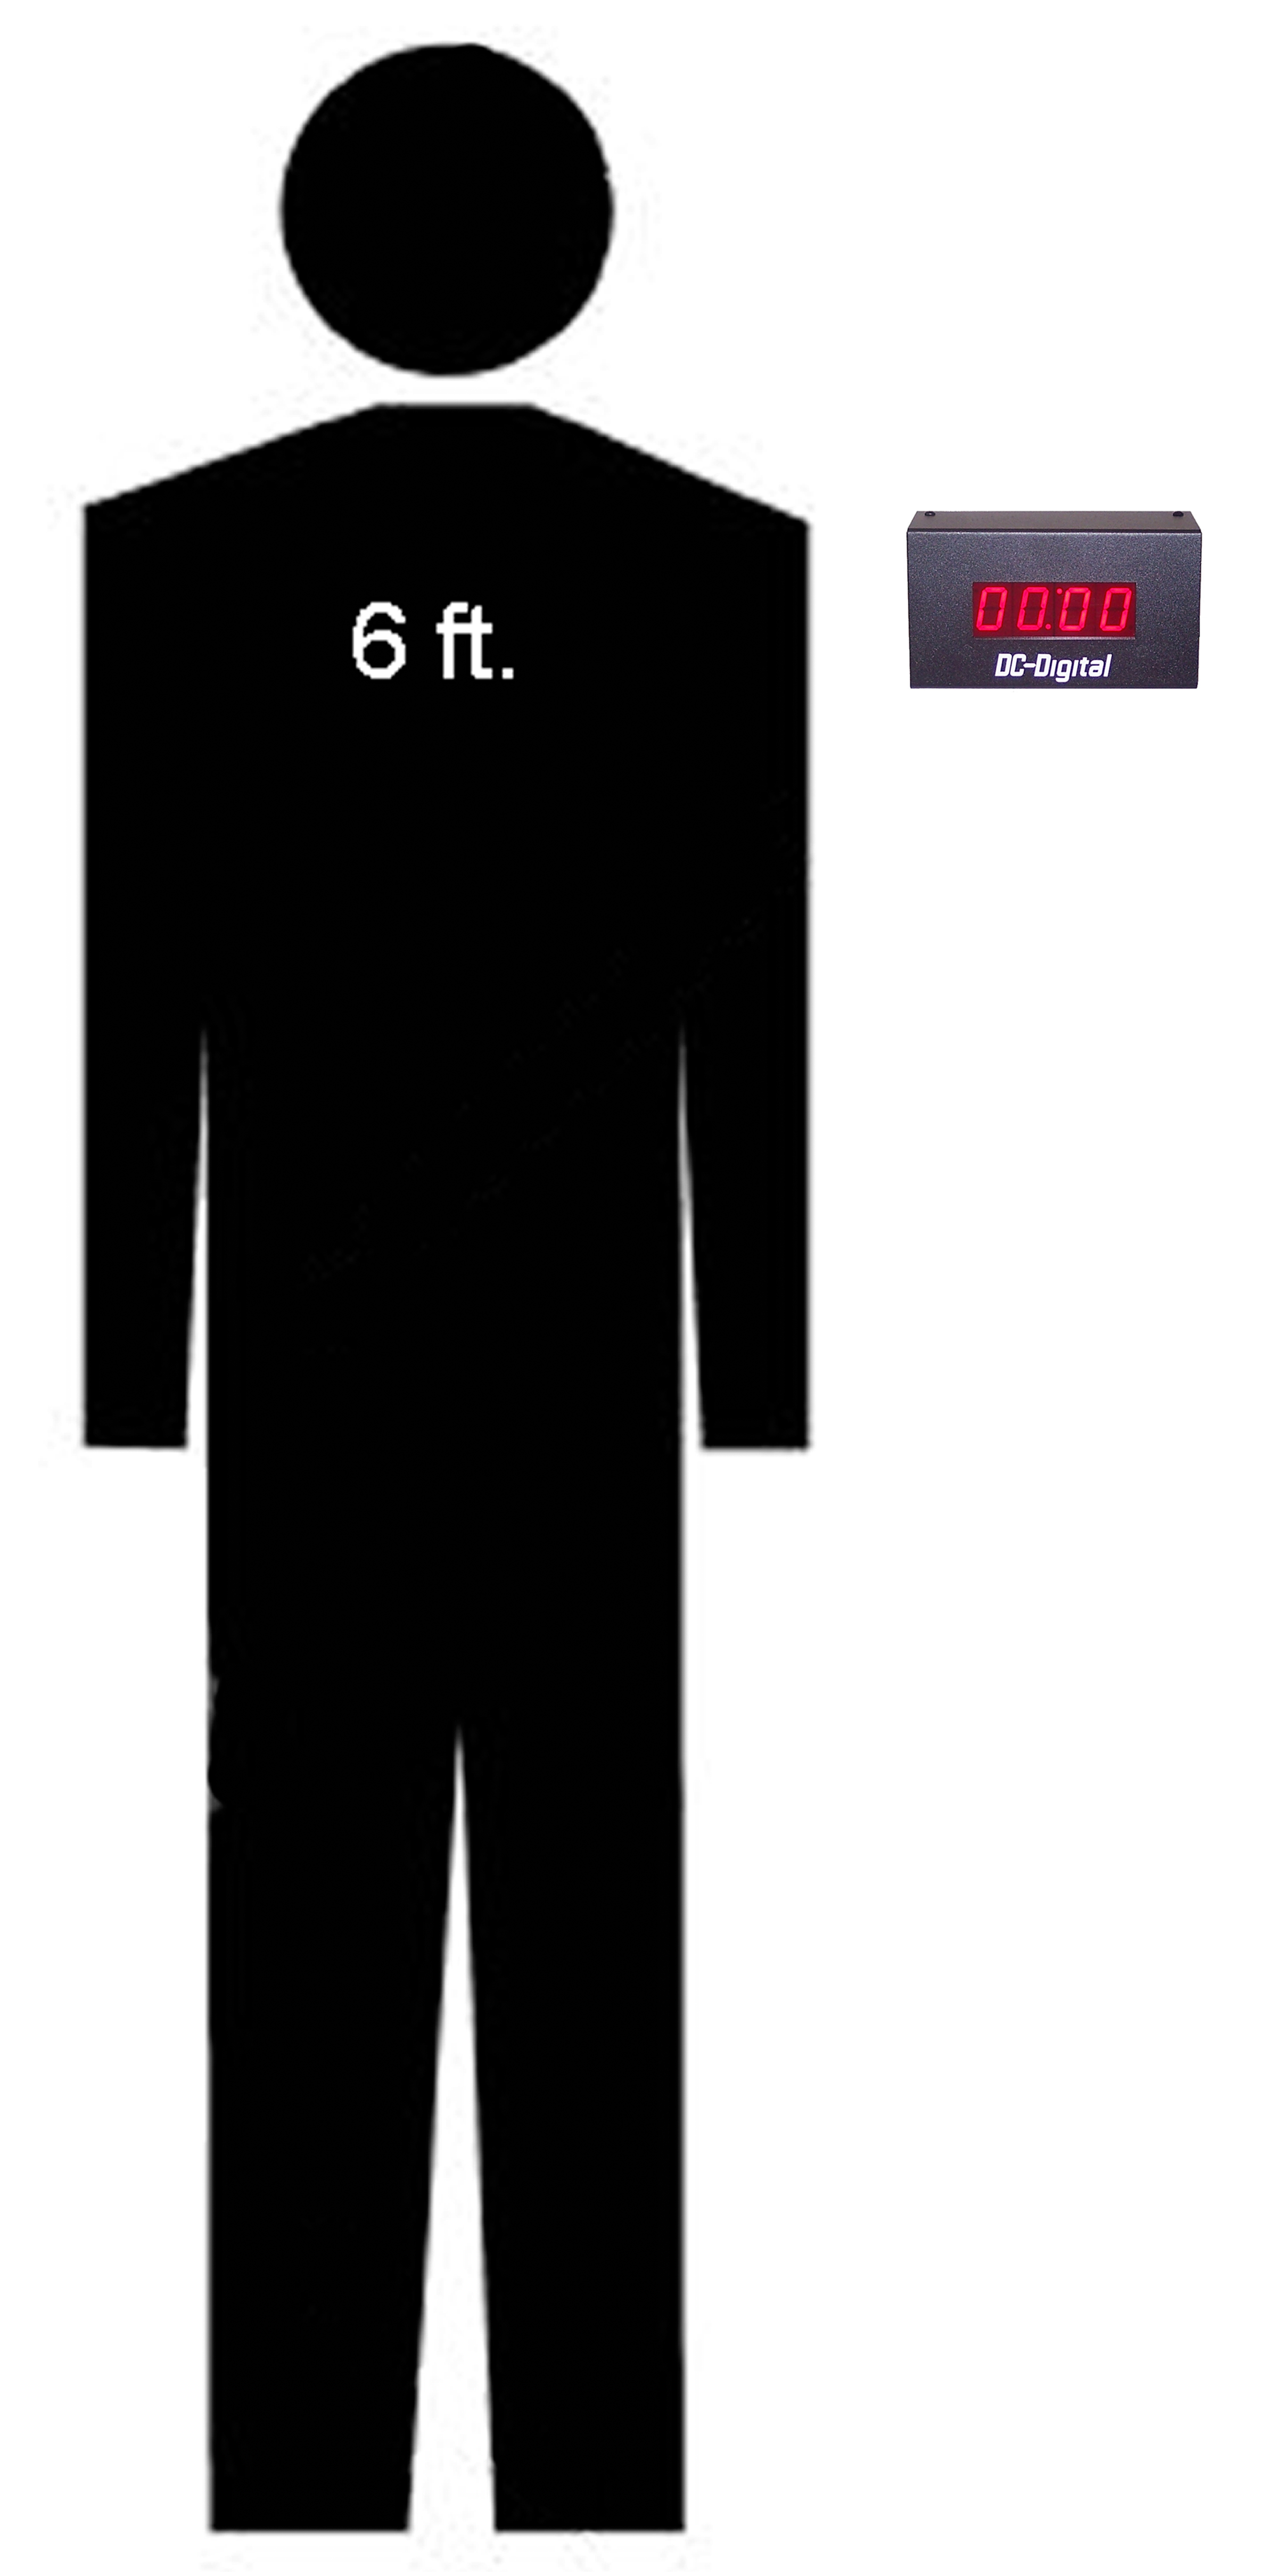 DC-10 timer with 6 foot silhouette of man